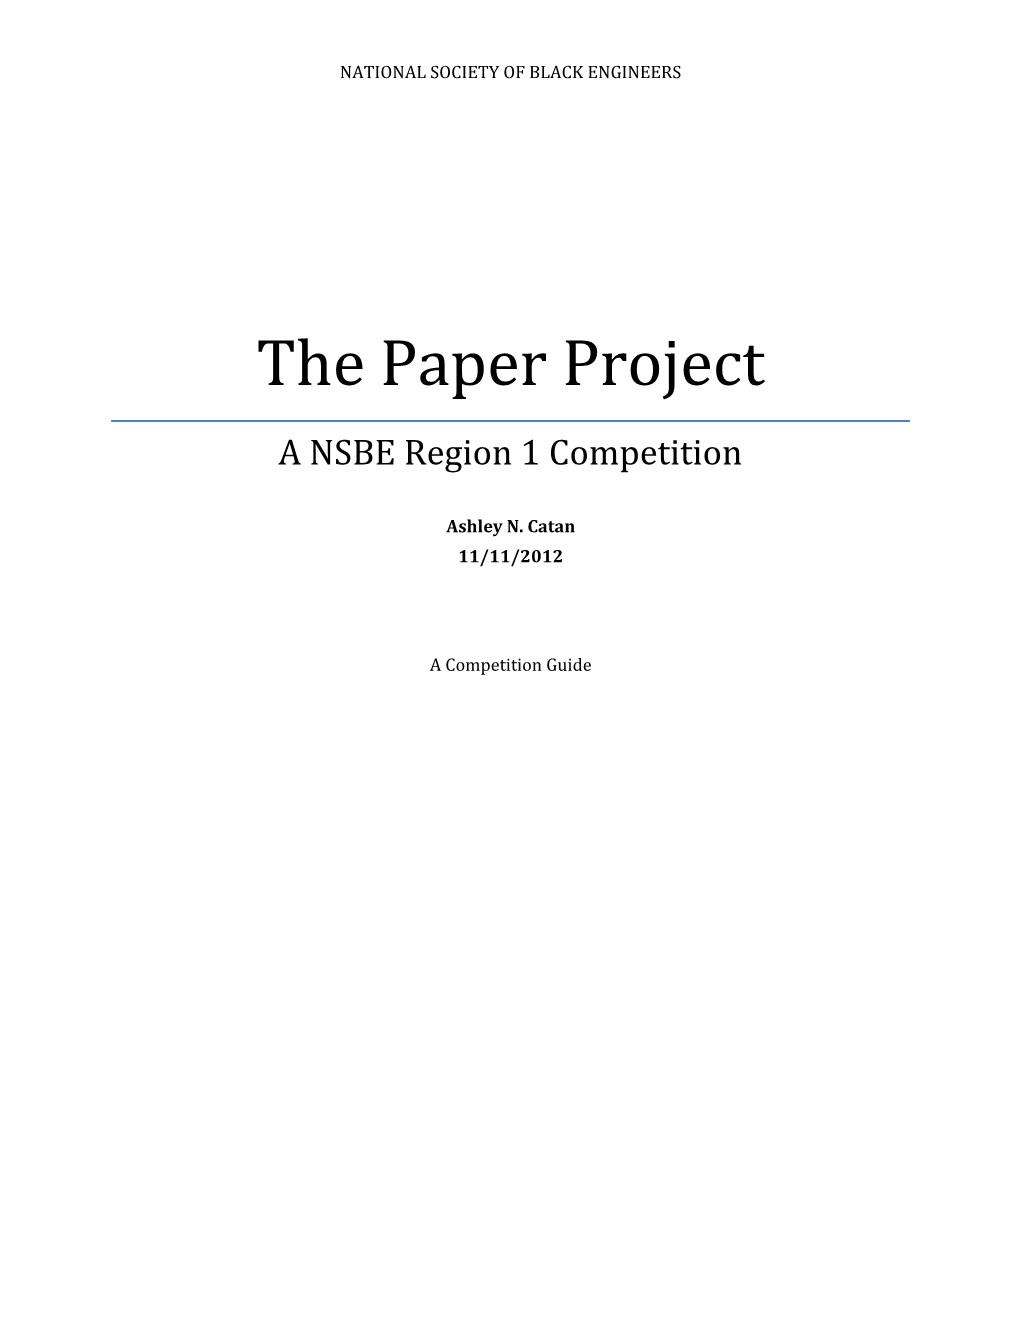 The Paper Project